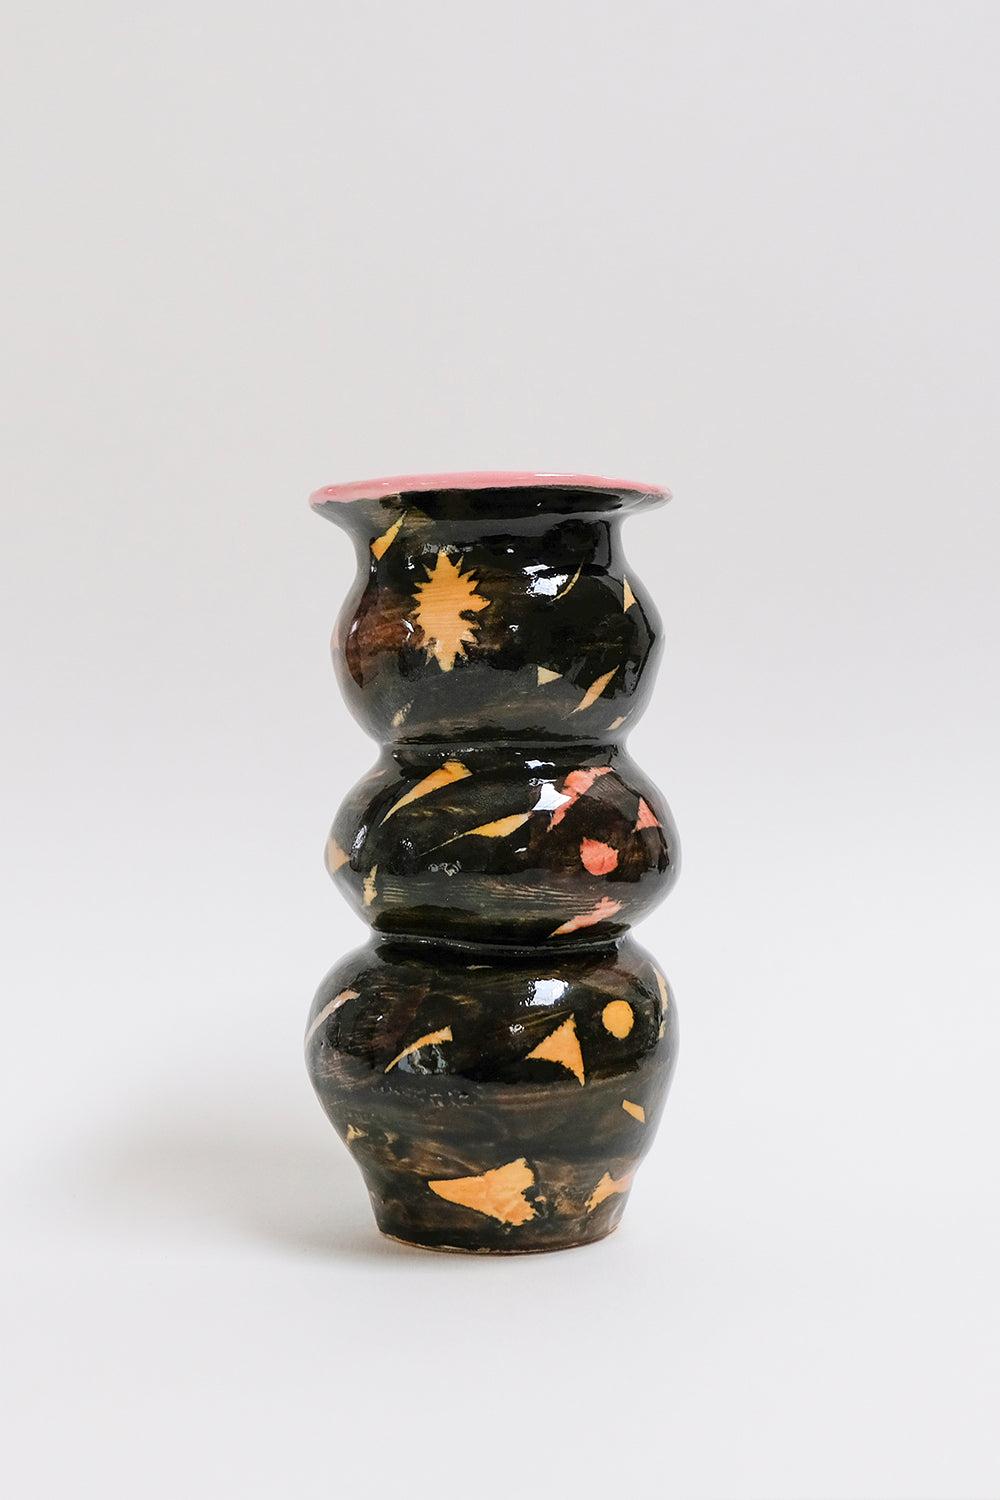 This contemporary black and bright pink ceramic vase features a geometric surface pattern and is an original artwork by Canadian artist Misbah Ahmed. This piece from her collection of Mur vessels explores organic feminine forms with clay. Mur -